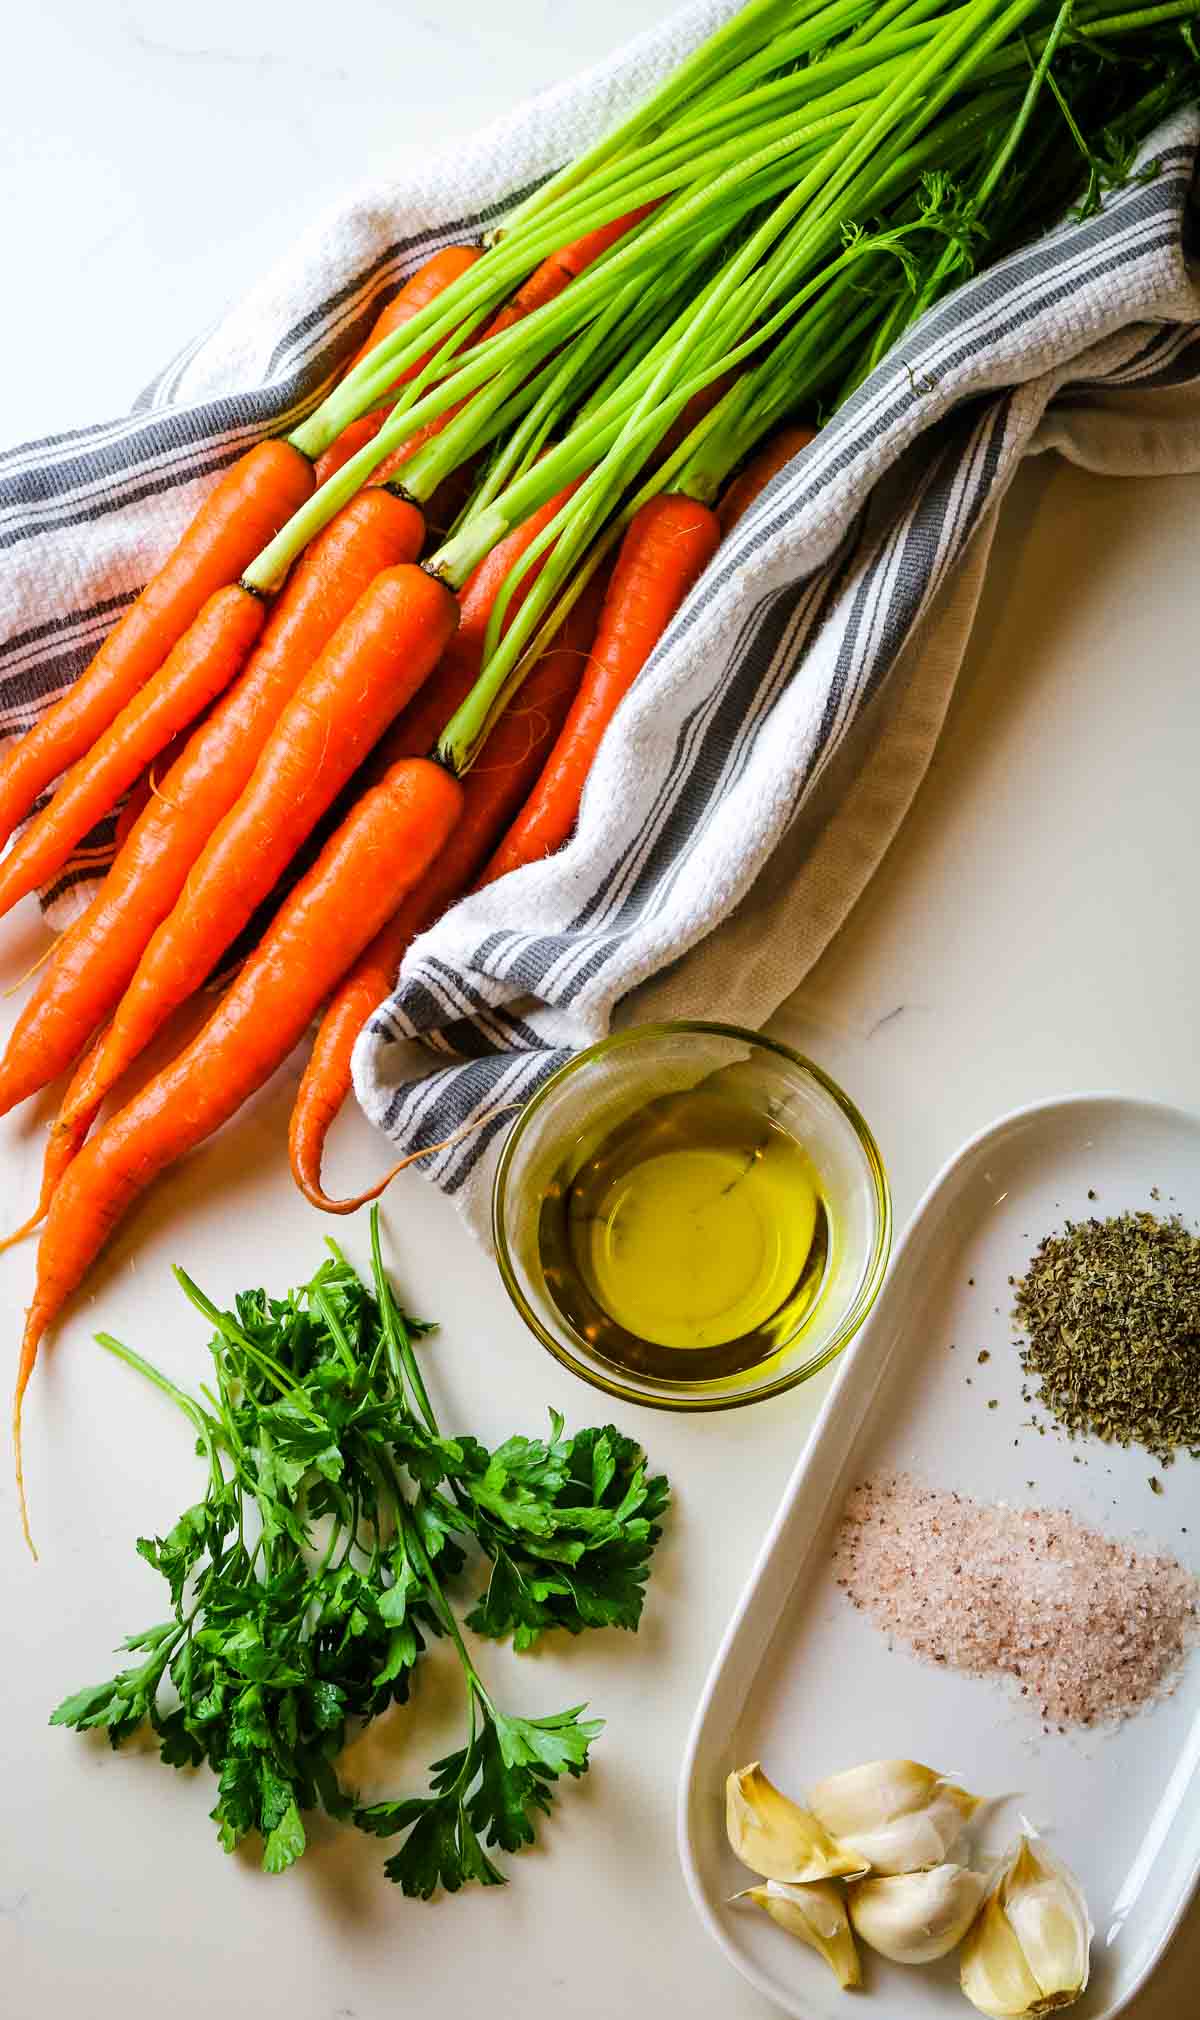 carrots, parsley, herbs, and oil